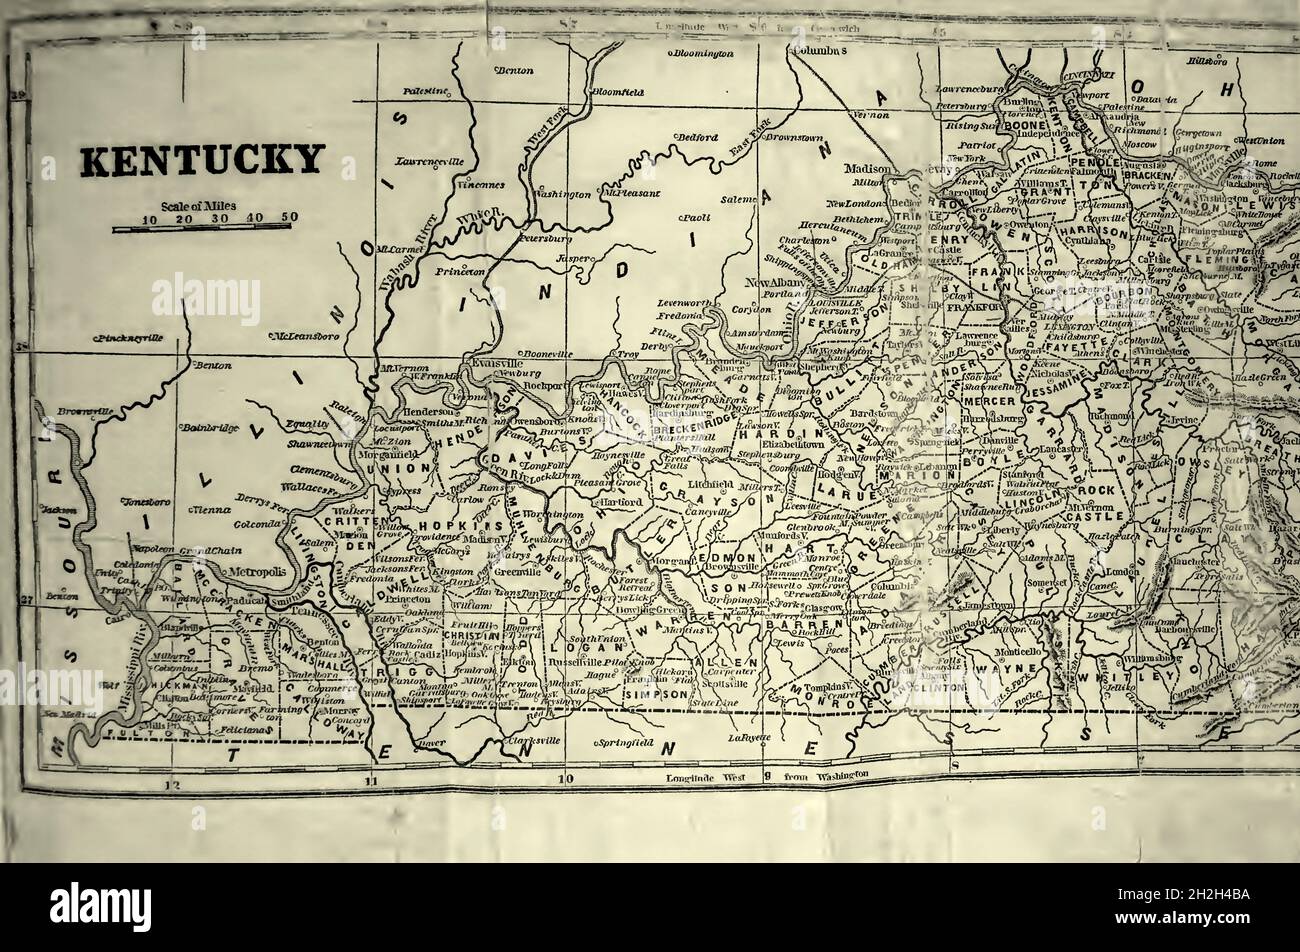 Map of Kentucky 1847 from the book ' Historical Sketches Of Kentucky (1847) ' ITS HISTORY, ANTIQUITIES, AND NATURAL CURIOSITIES, GEOGRAPHICAL, STATISTICAL, AND GEOLOGICAL DESCRIPTIONS. WITH ANECDOTES OF PIONEER LIFE By Lewis Collins. Published by Lewis Collins, Maysville, KY. and J. A. & U. P. James Cincinnati. in 1847 Stock Photo